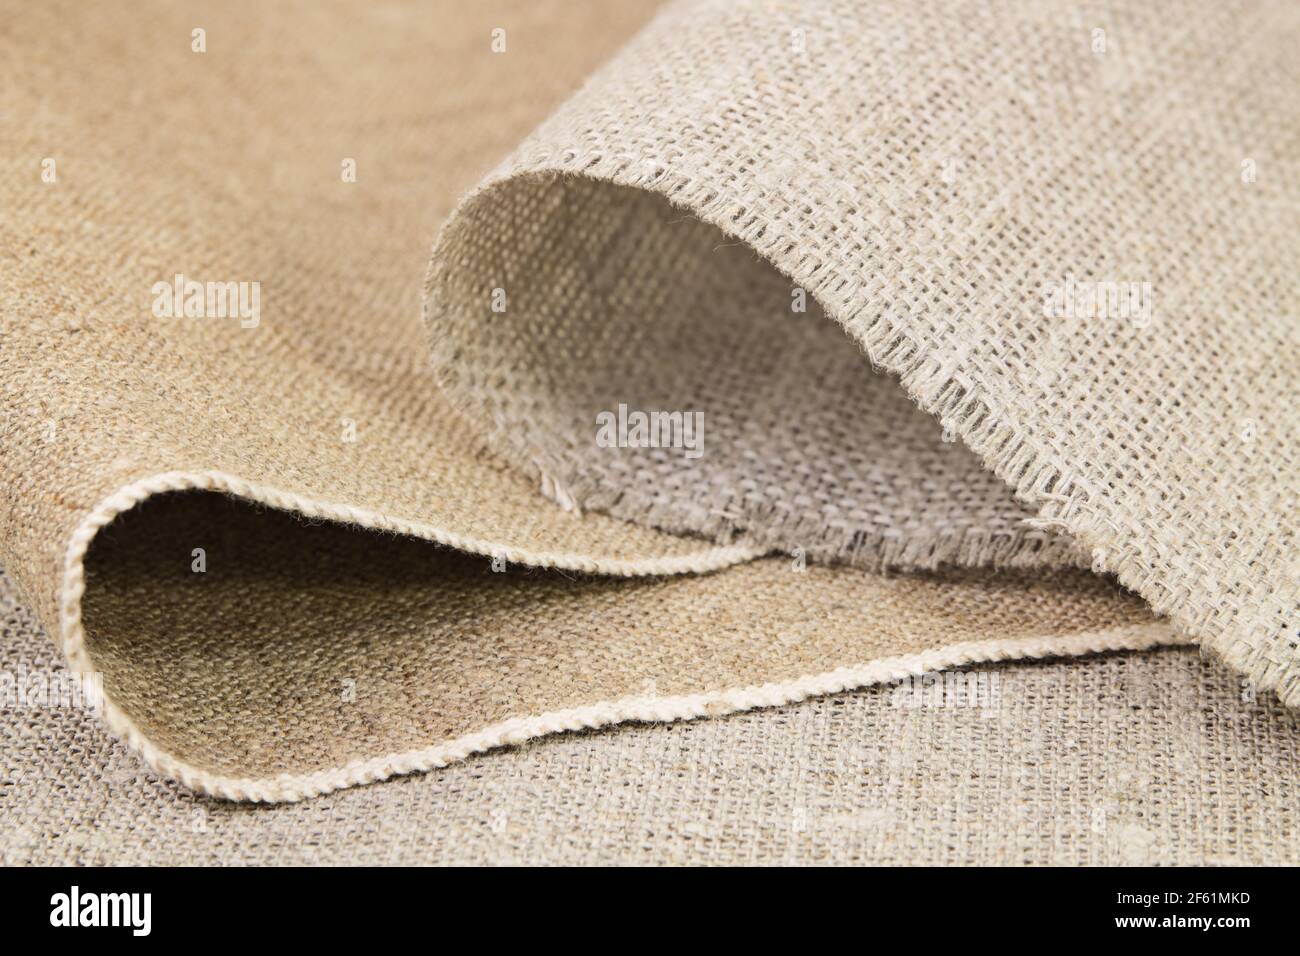 Folds of gray cotton and flax clothes Stock Photo